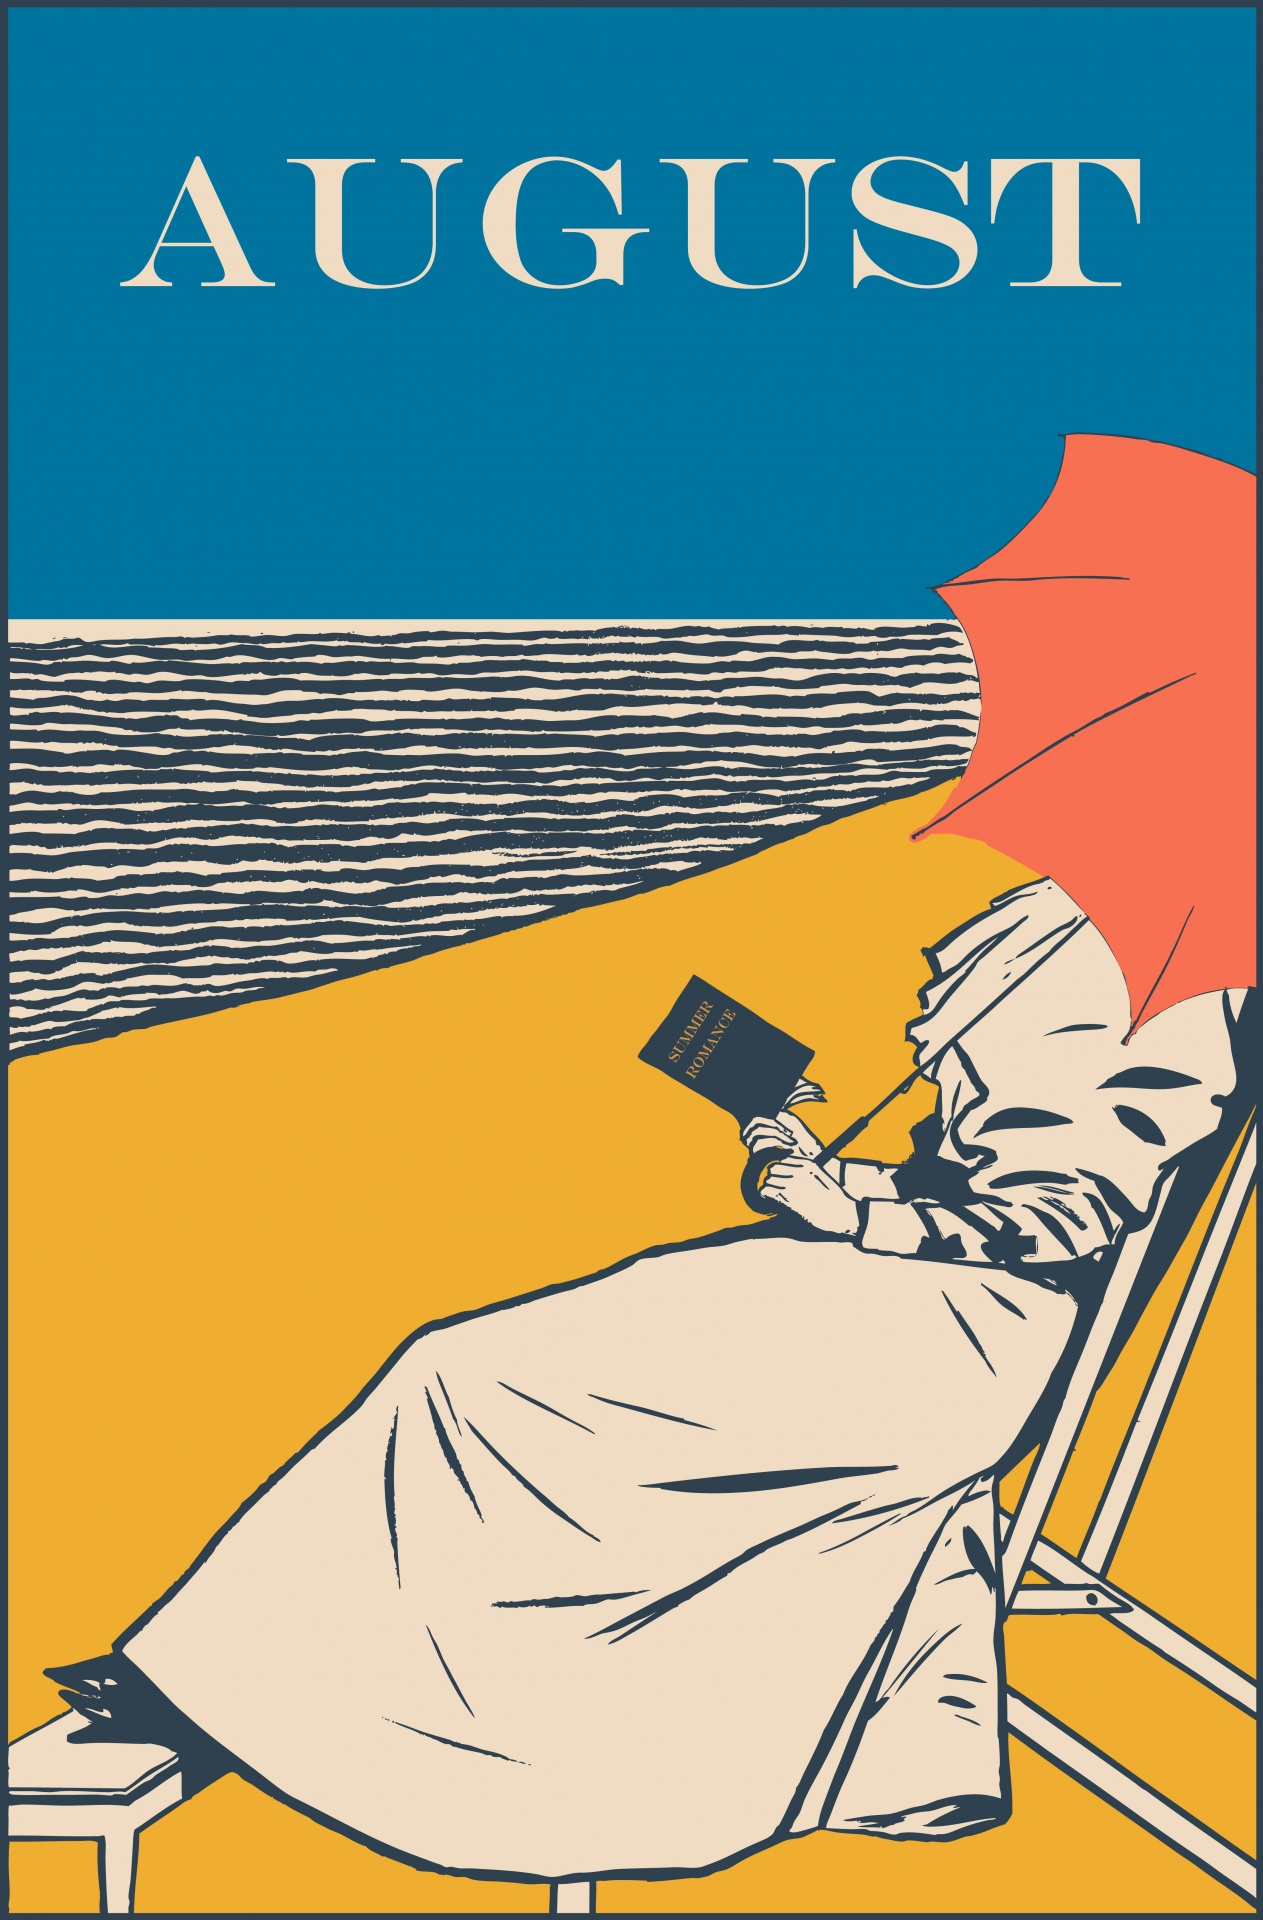 Re-worked vintage poster of woman in deckchair reading book on sandy beach with ocean and blue sky poster, print